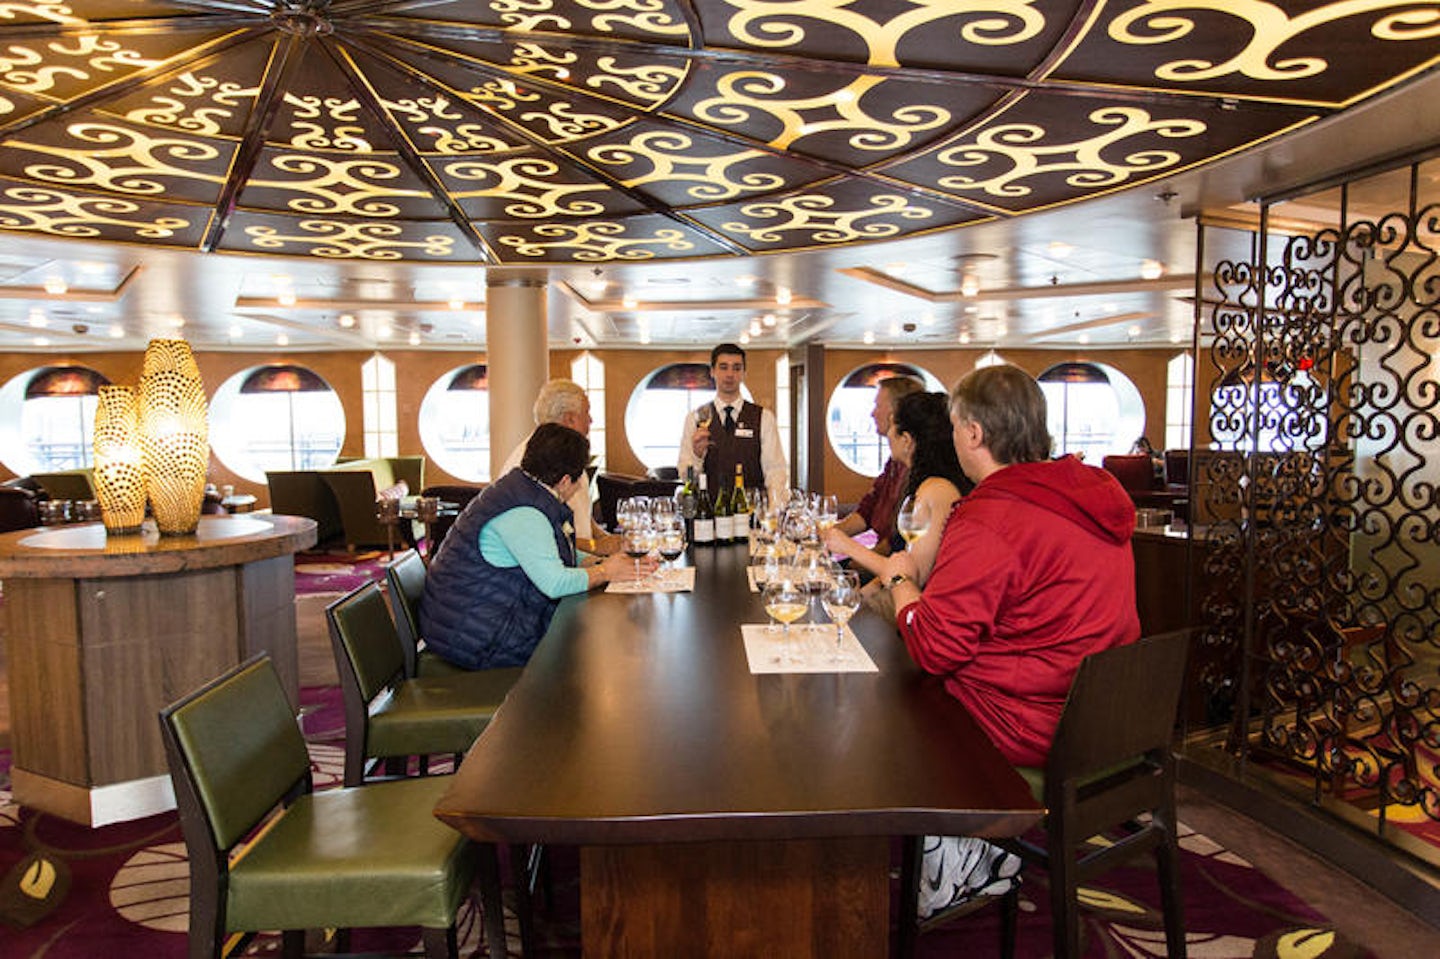 Cellar Masters on Celebrity Infinity